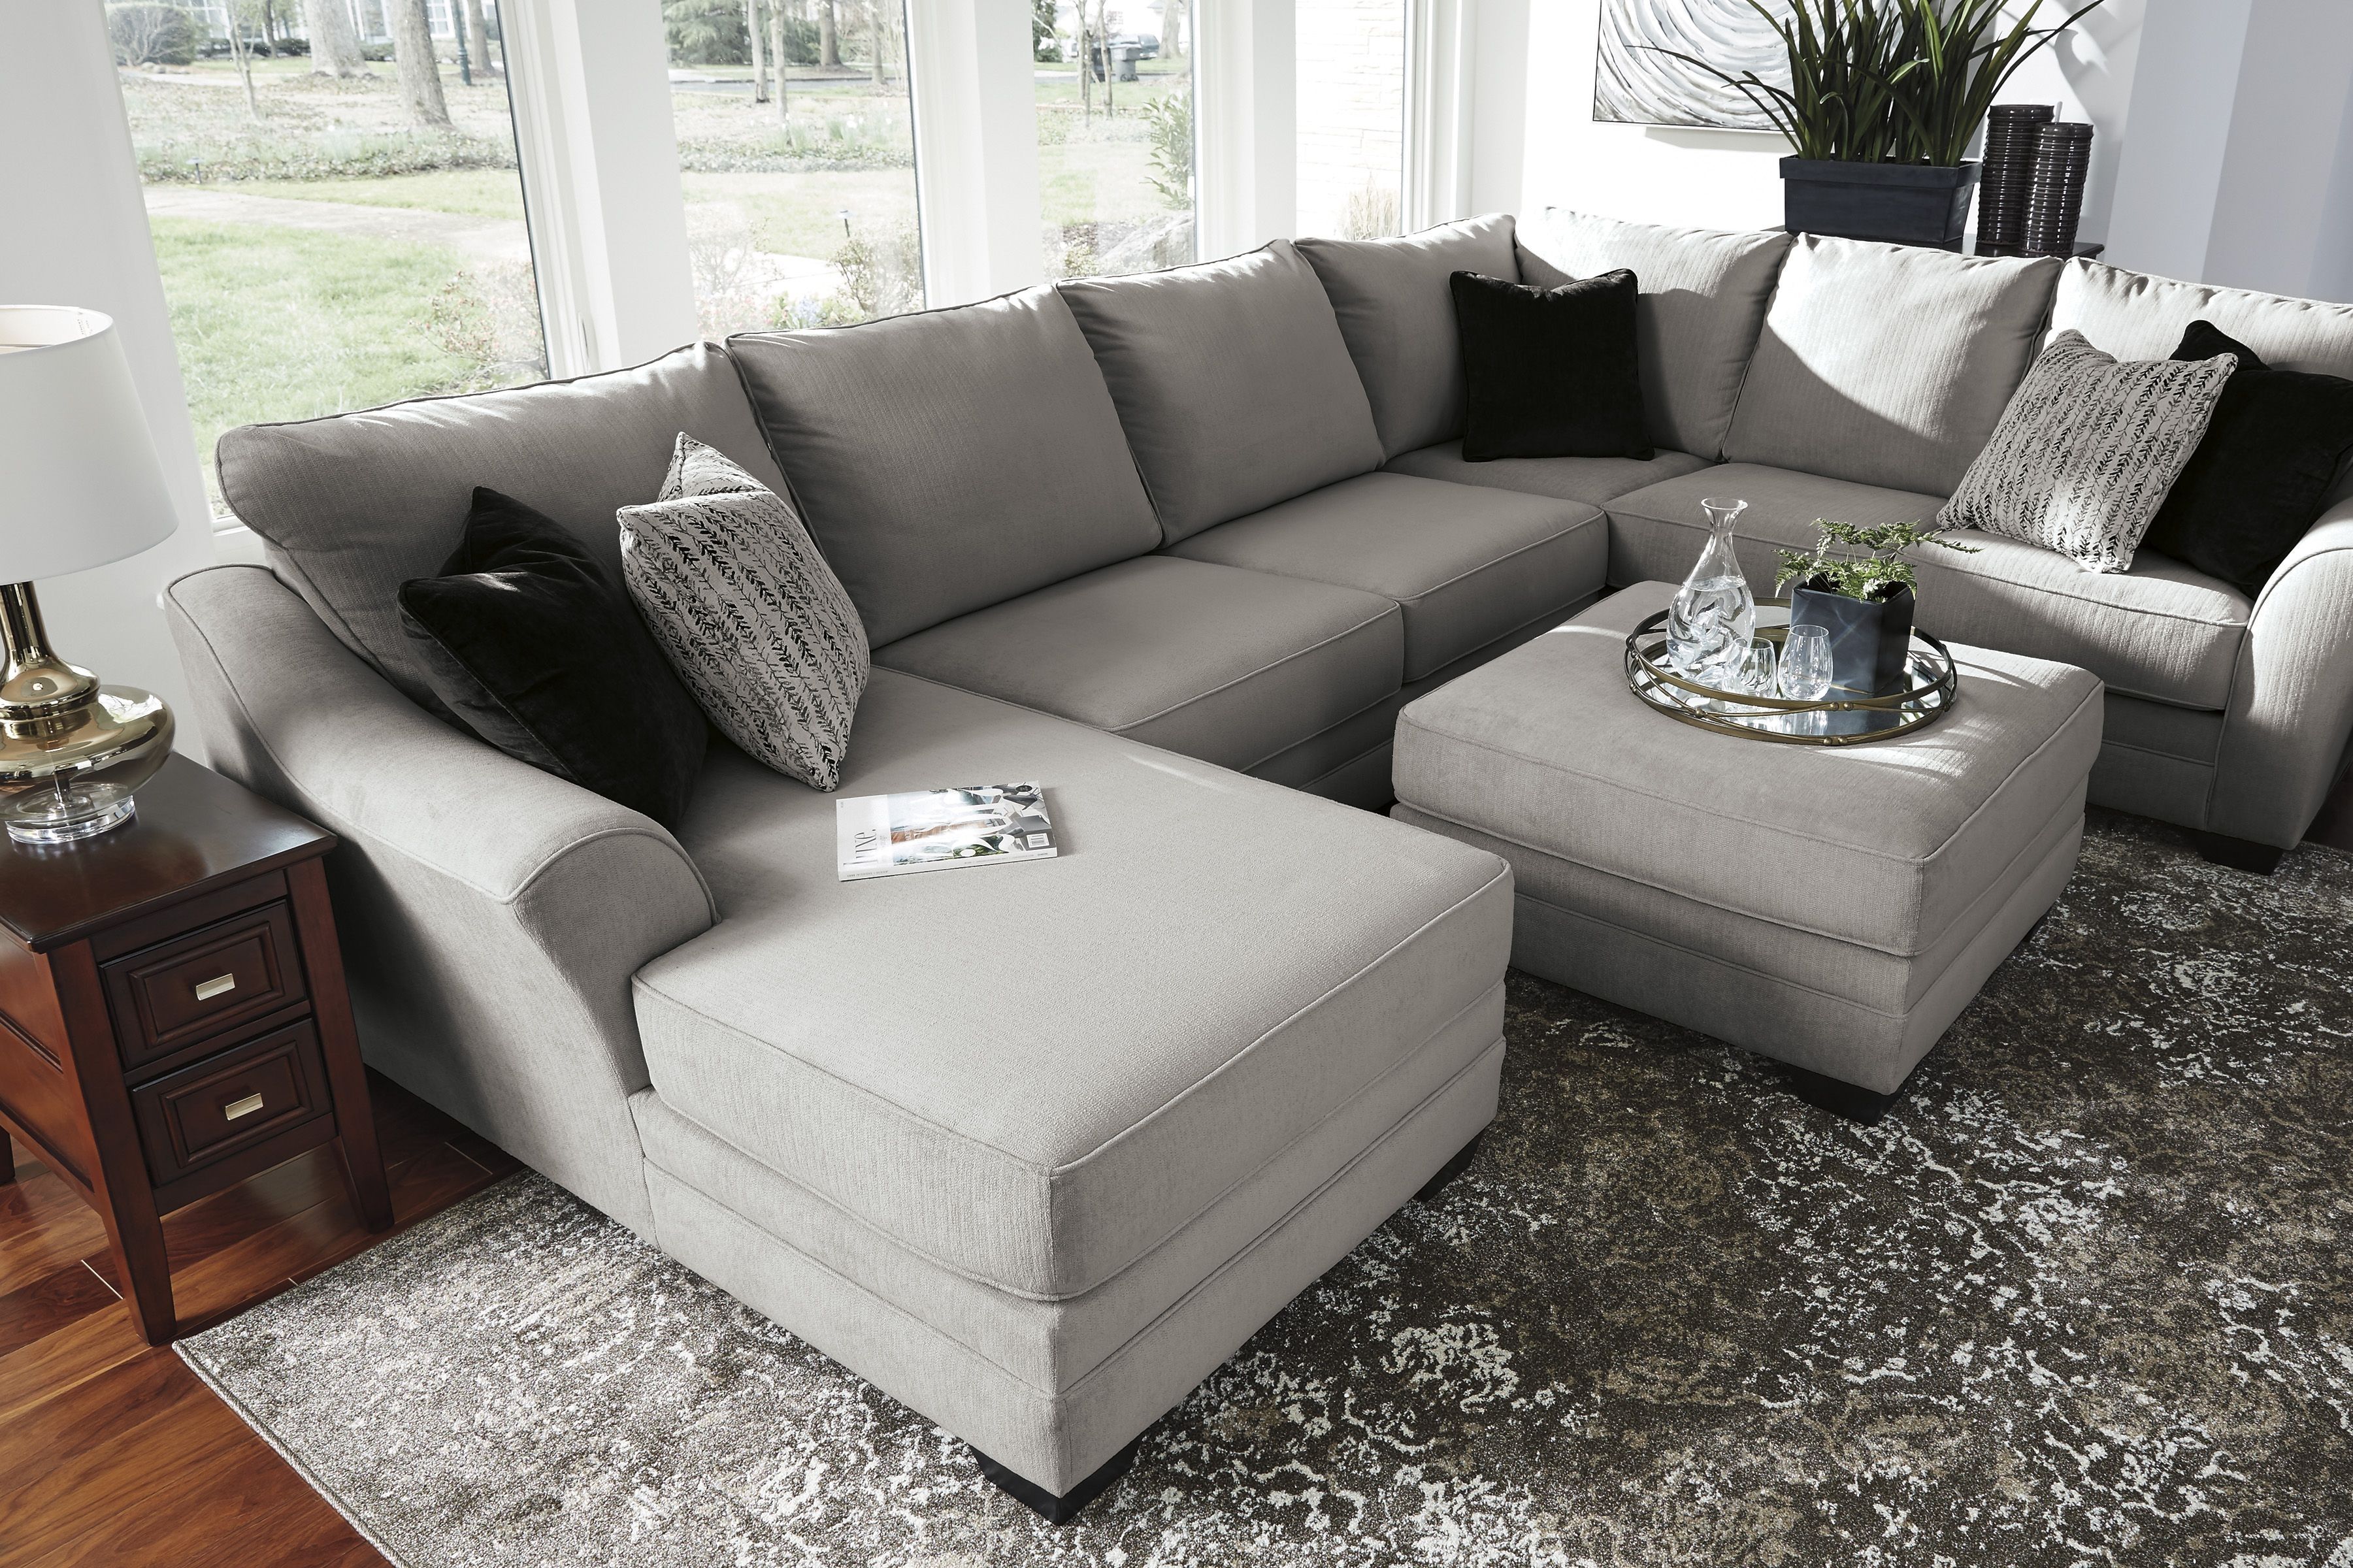 Palempor 3 Piece Laf Sectional In 2018 | Home Is Where The Heart Is With Norfolk Chocolate 3 Piece Sectionals With Raf Chaise (View 20 of 30)